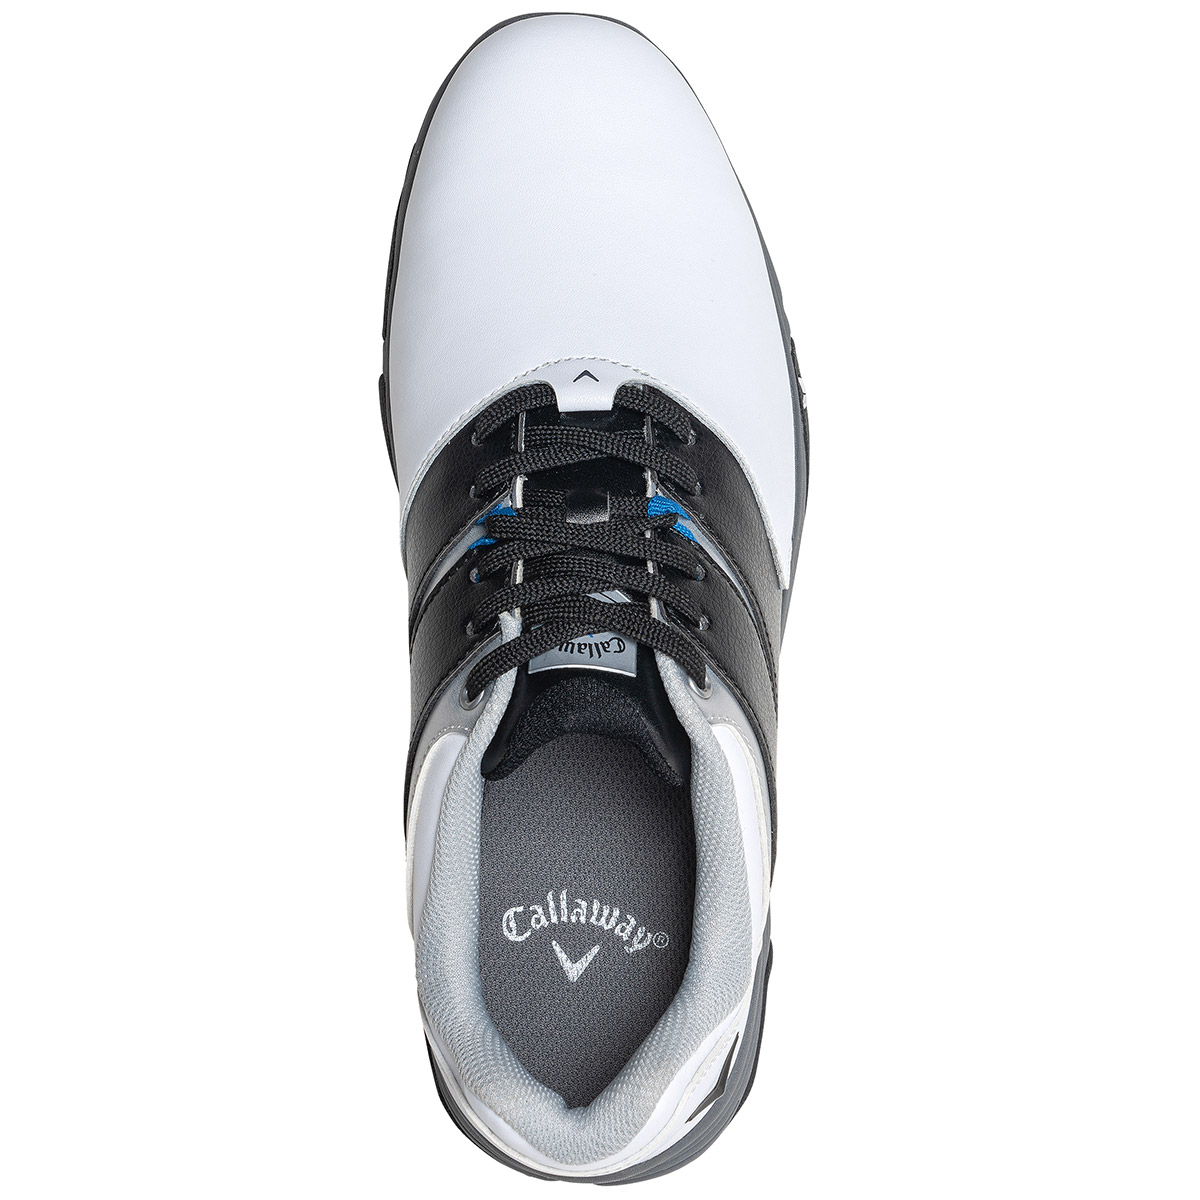 Callaway Golf Chev Mission Shoes from 